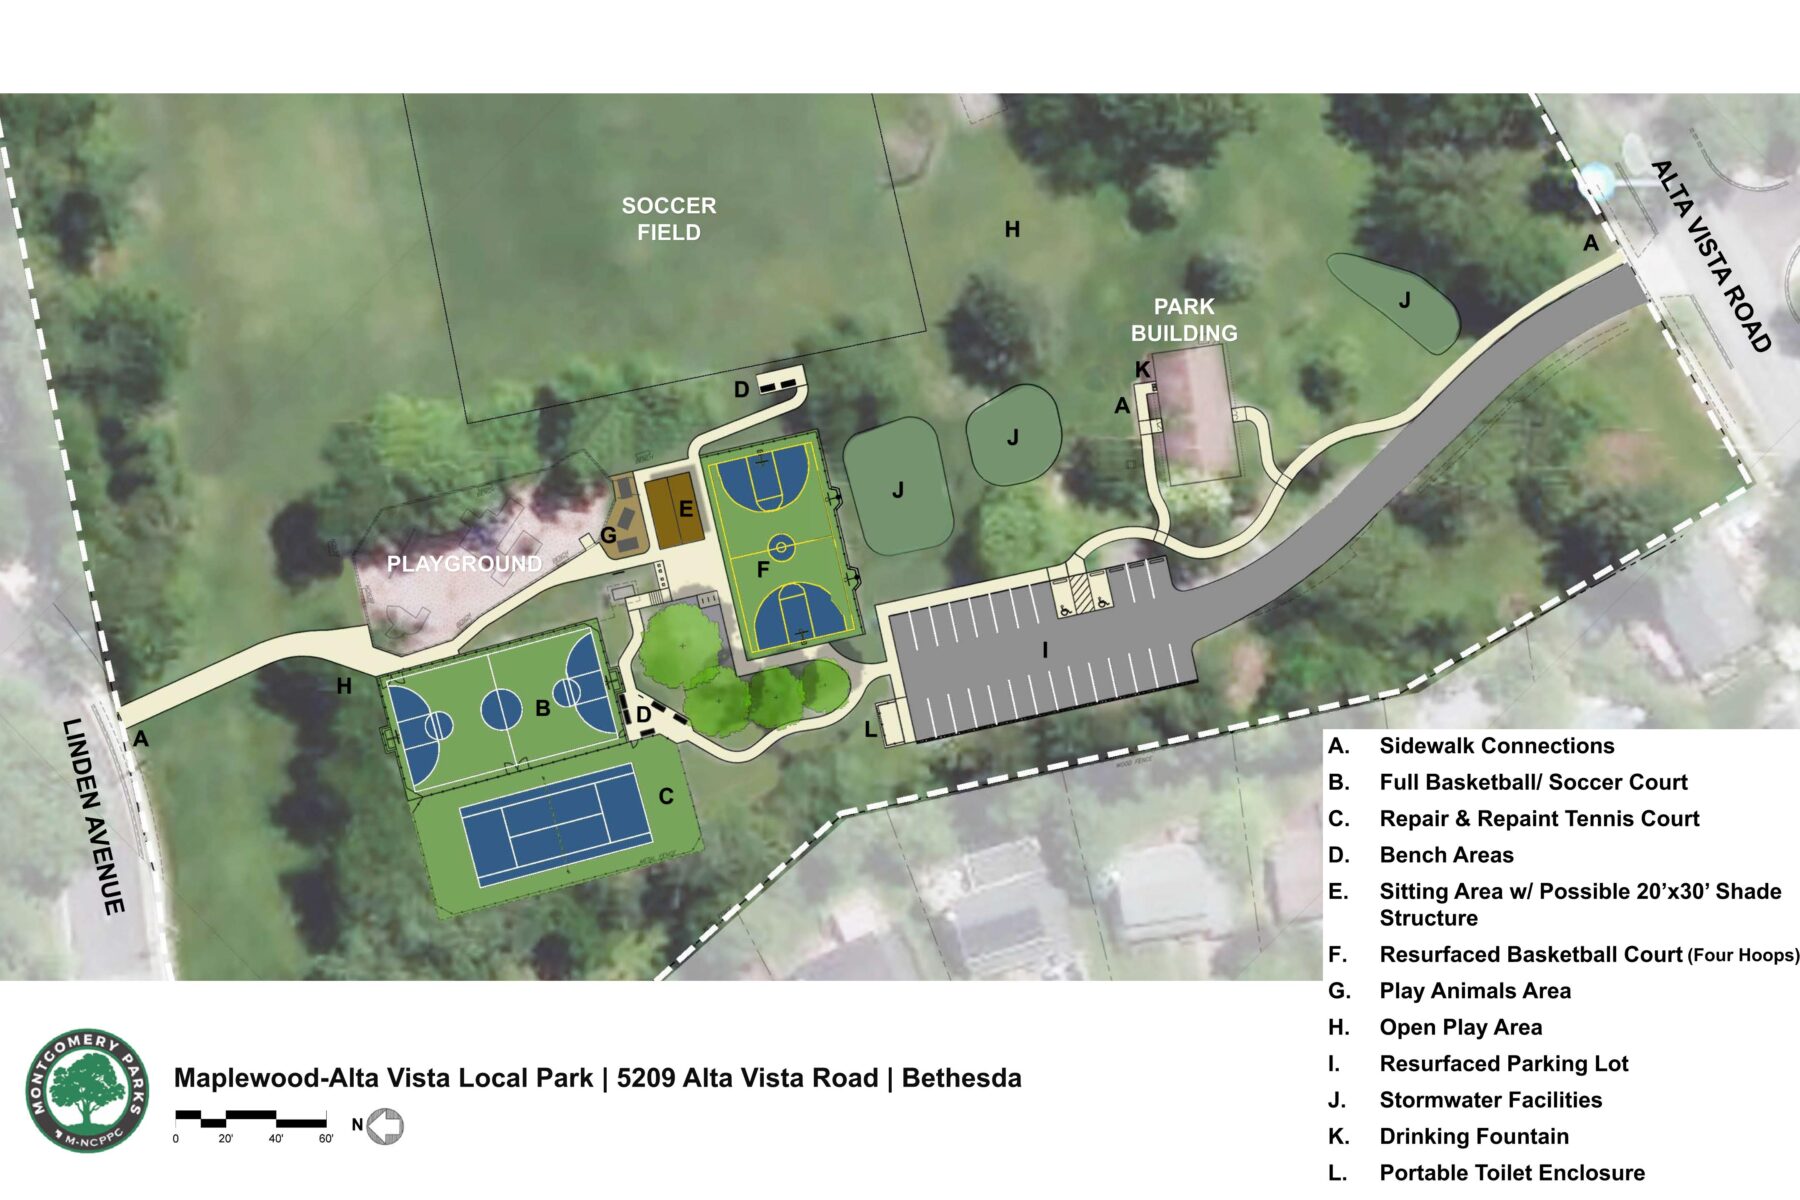 Areal rendering of Maplewood-Alta Vista Local Park renovation concept plan. The image shows where there will be sidewalk connections, a full basketball court and soccer court, a renovated tennis court, benches and sitting area, a renovated full basketball court with 4 hoops, play animal area, open area, resurfaced parking lot, stormwater facilities, drinking fountain, and portable toilet enclosure.